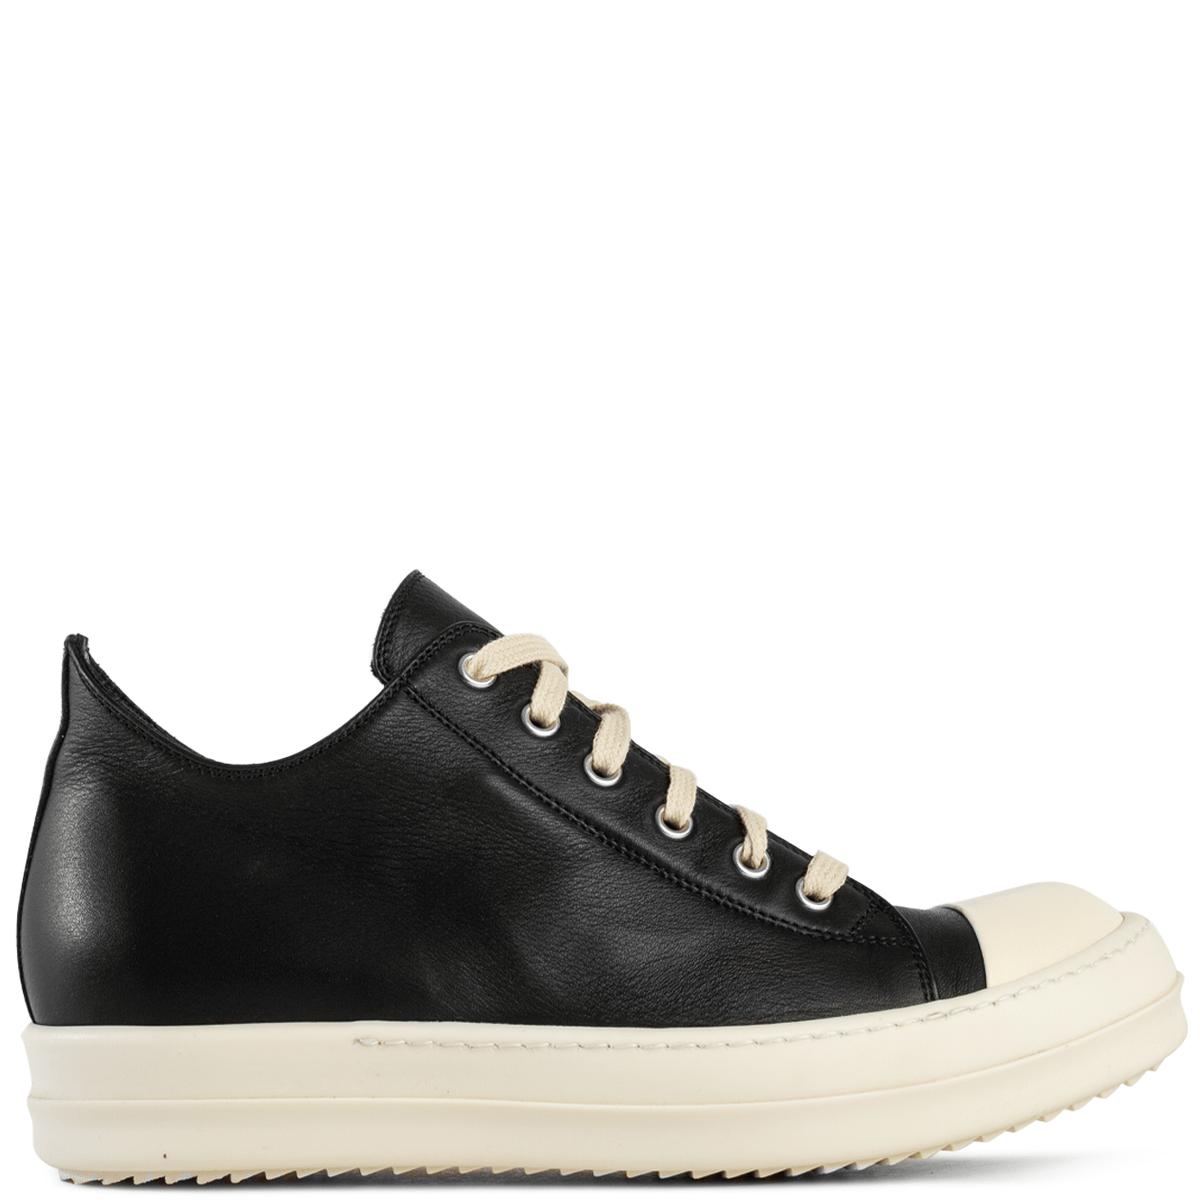 Rick Owens Womens Low Leather Sneakers in Black - Save 36% - Lyst